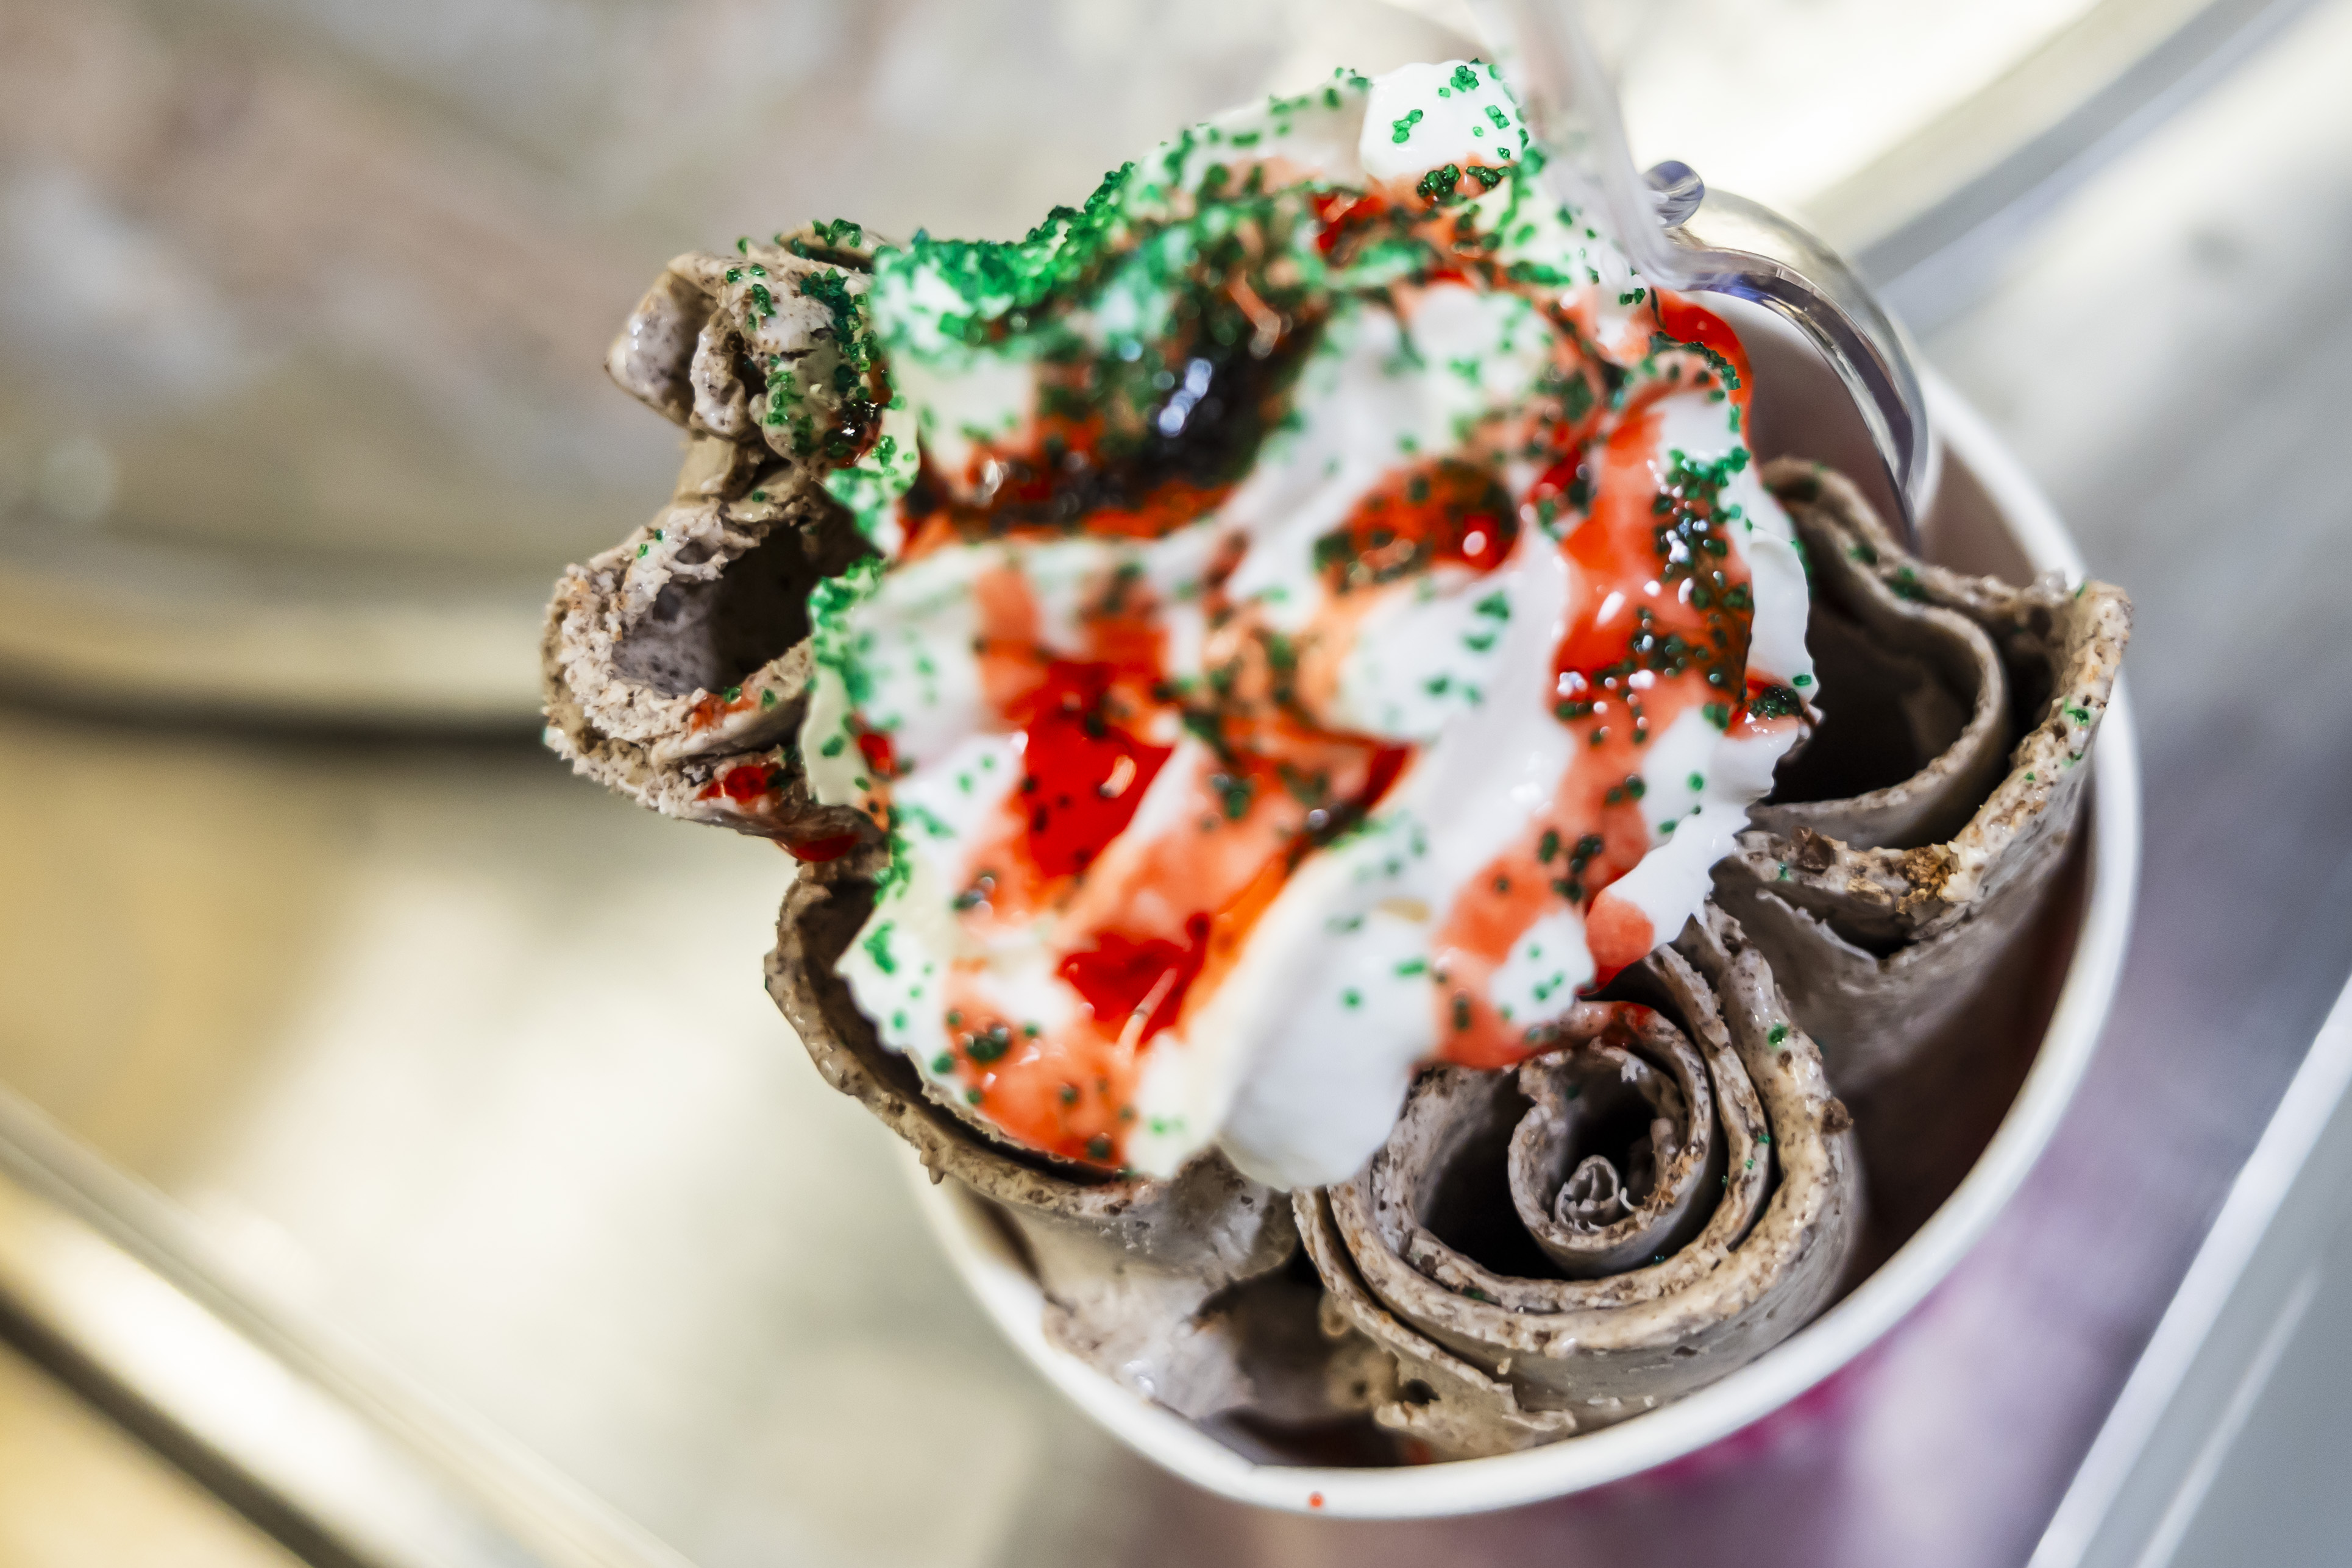 Thai rolled ice cream craze about to hit Madison